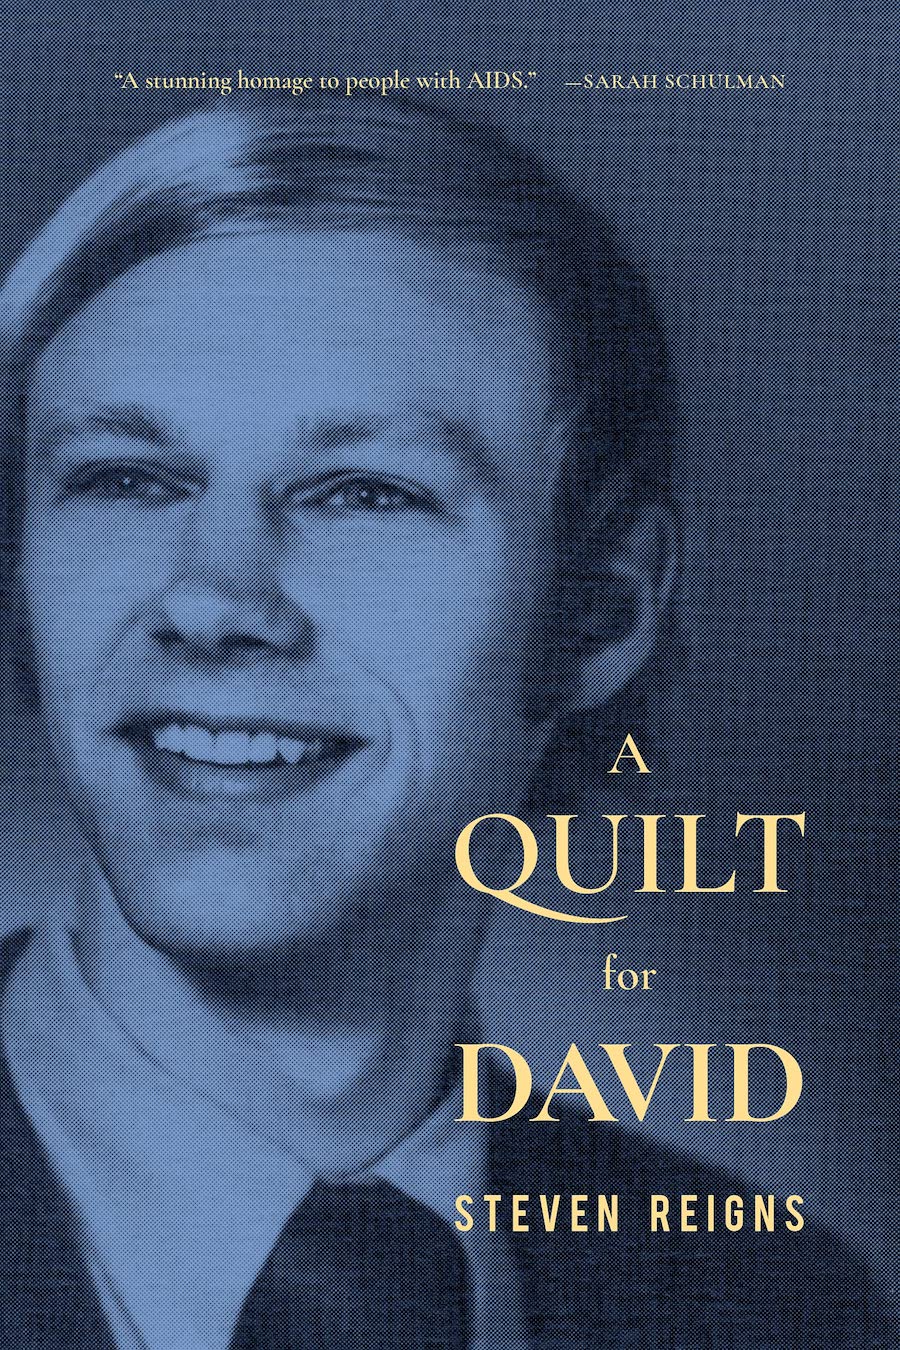 Book cover for A Quilt for David by Steven Reigns; image is a colorized black and white photo--loking vintage, say, 1960s--a smiling young masn with blond hair